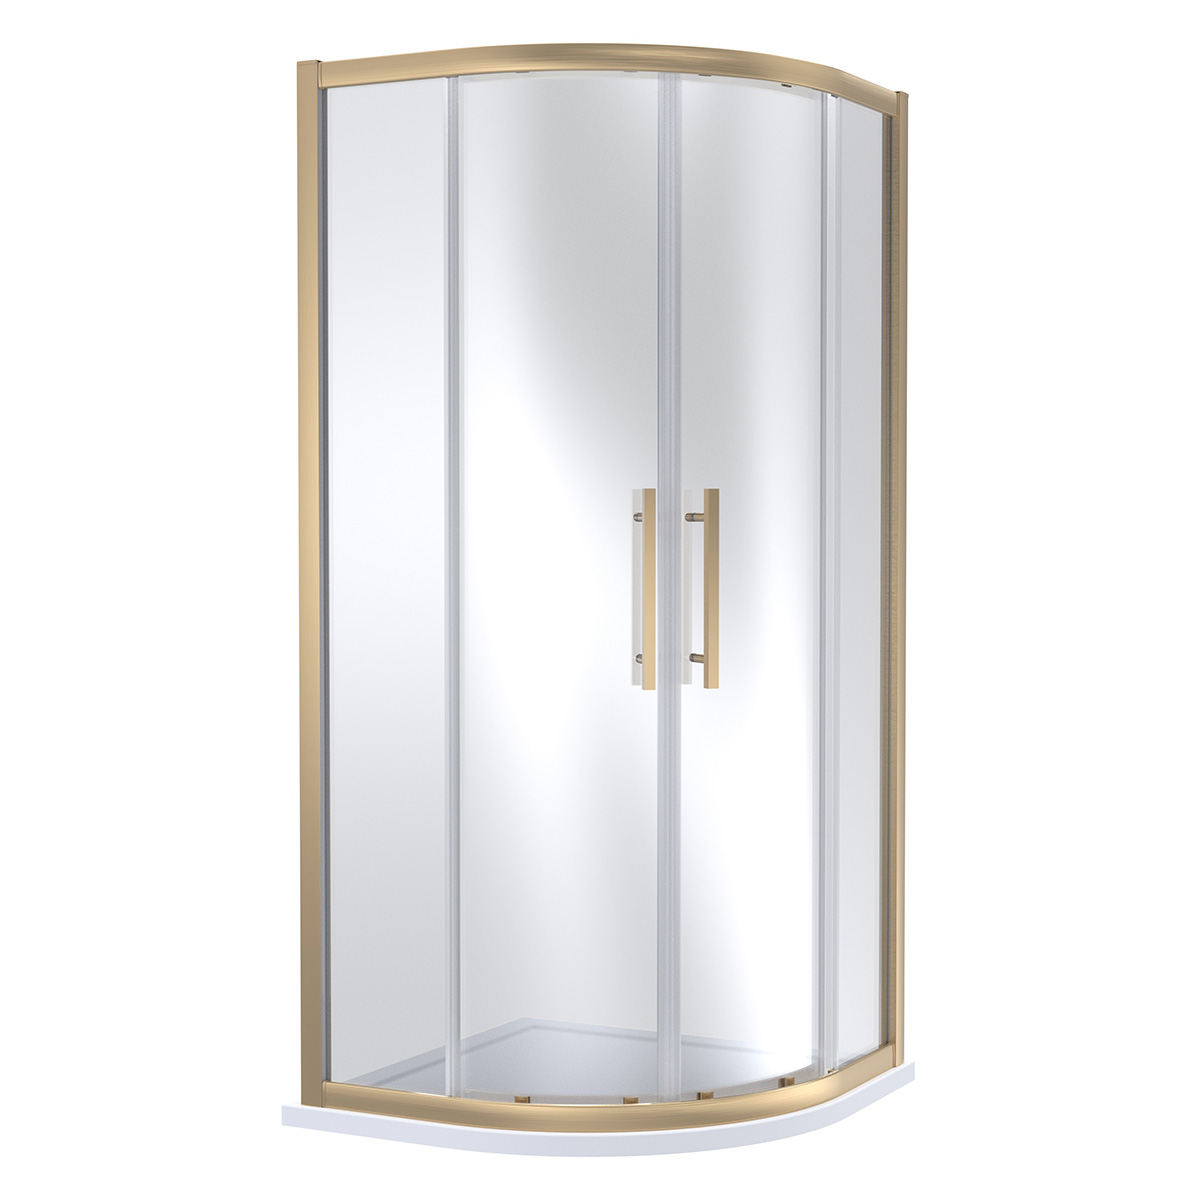 Hudson Reed 800mm Quadrant Shower Enclosure with Square Handle - Brushed Brass